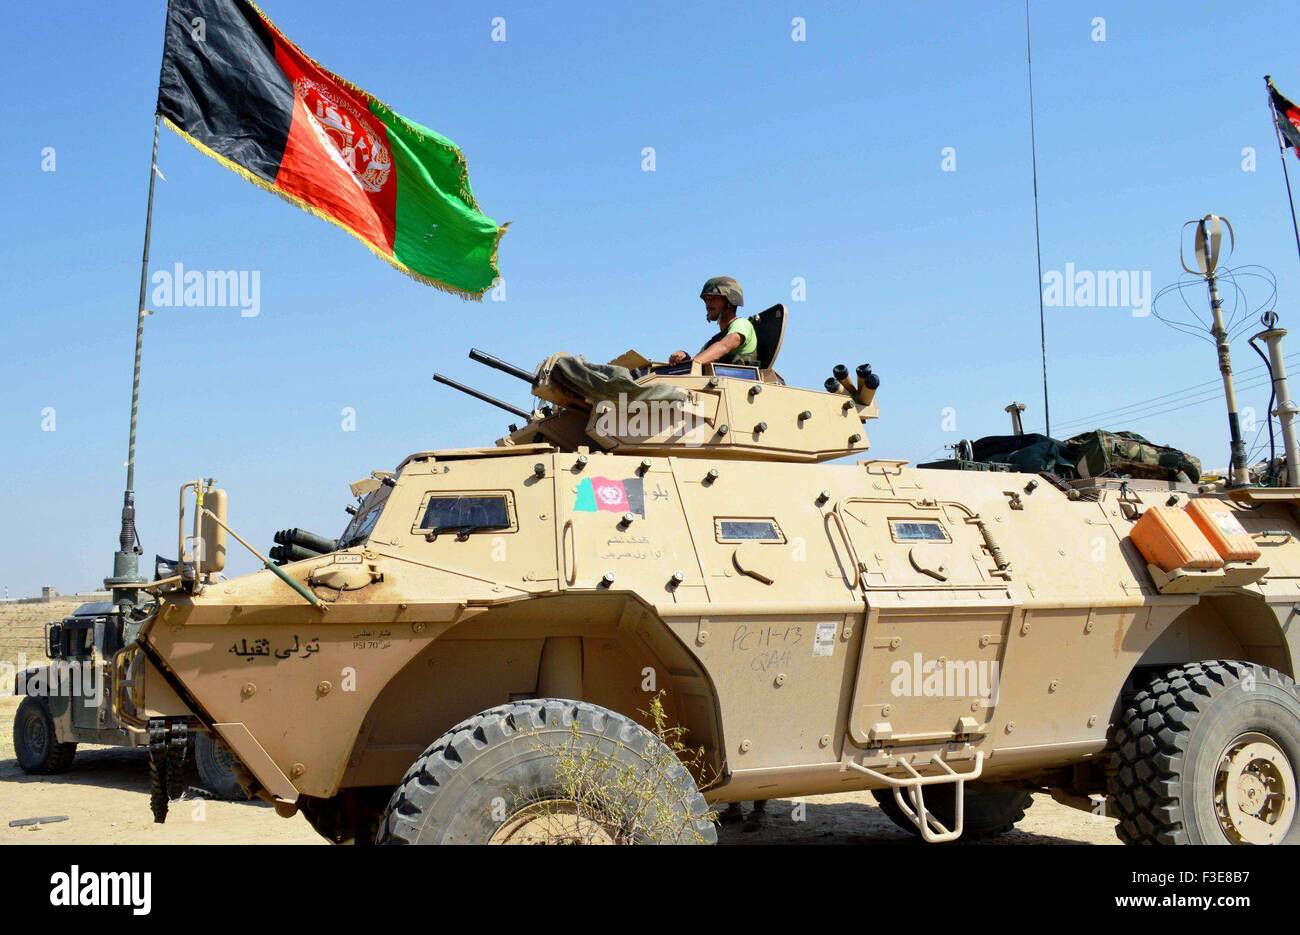 Kunduz. 6th Oct, 2015. An Afghan soldier sits on the top of a military vehicle in Kunduz province of Afghanistan, Oct. 6, 2015. Afghan security forces after five days of fierce fighting were able to reopen the road linking Baghlan to Kunduz city and sent reinforcement there to bolster government positions against Taliban fighters, police said. Credit:  Ajmal/Xinhua/Alamy Live News Stock Photo